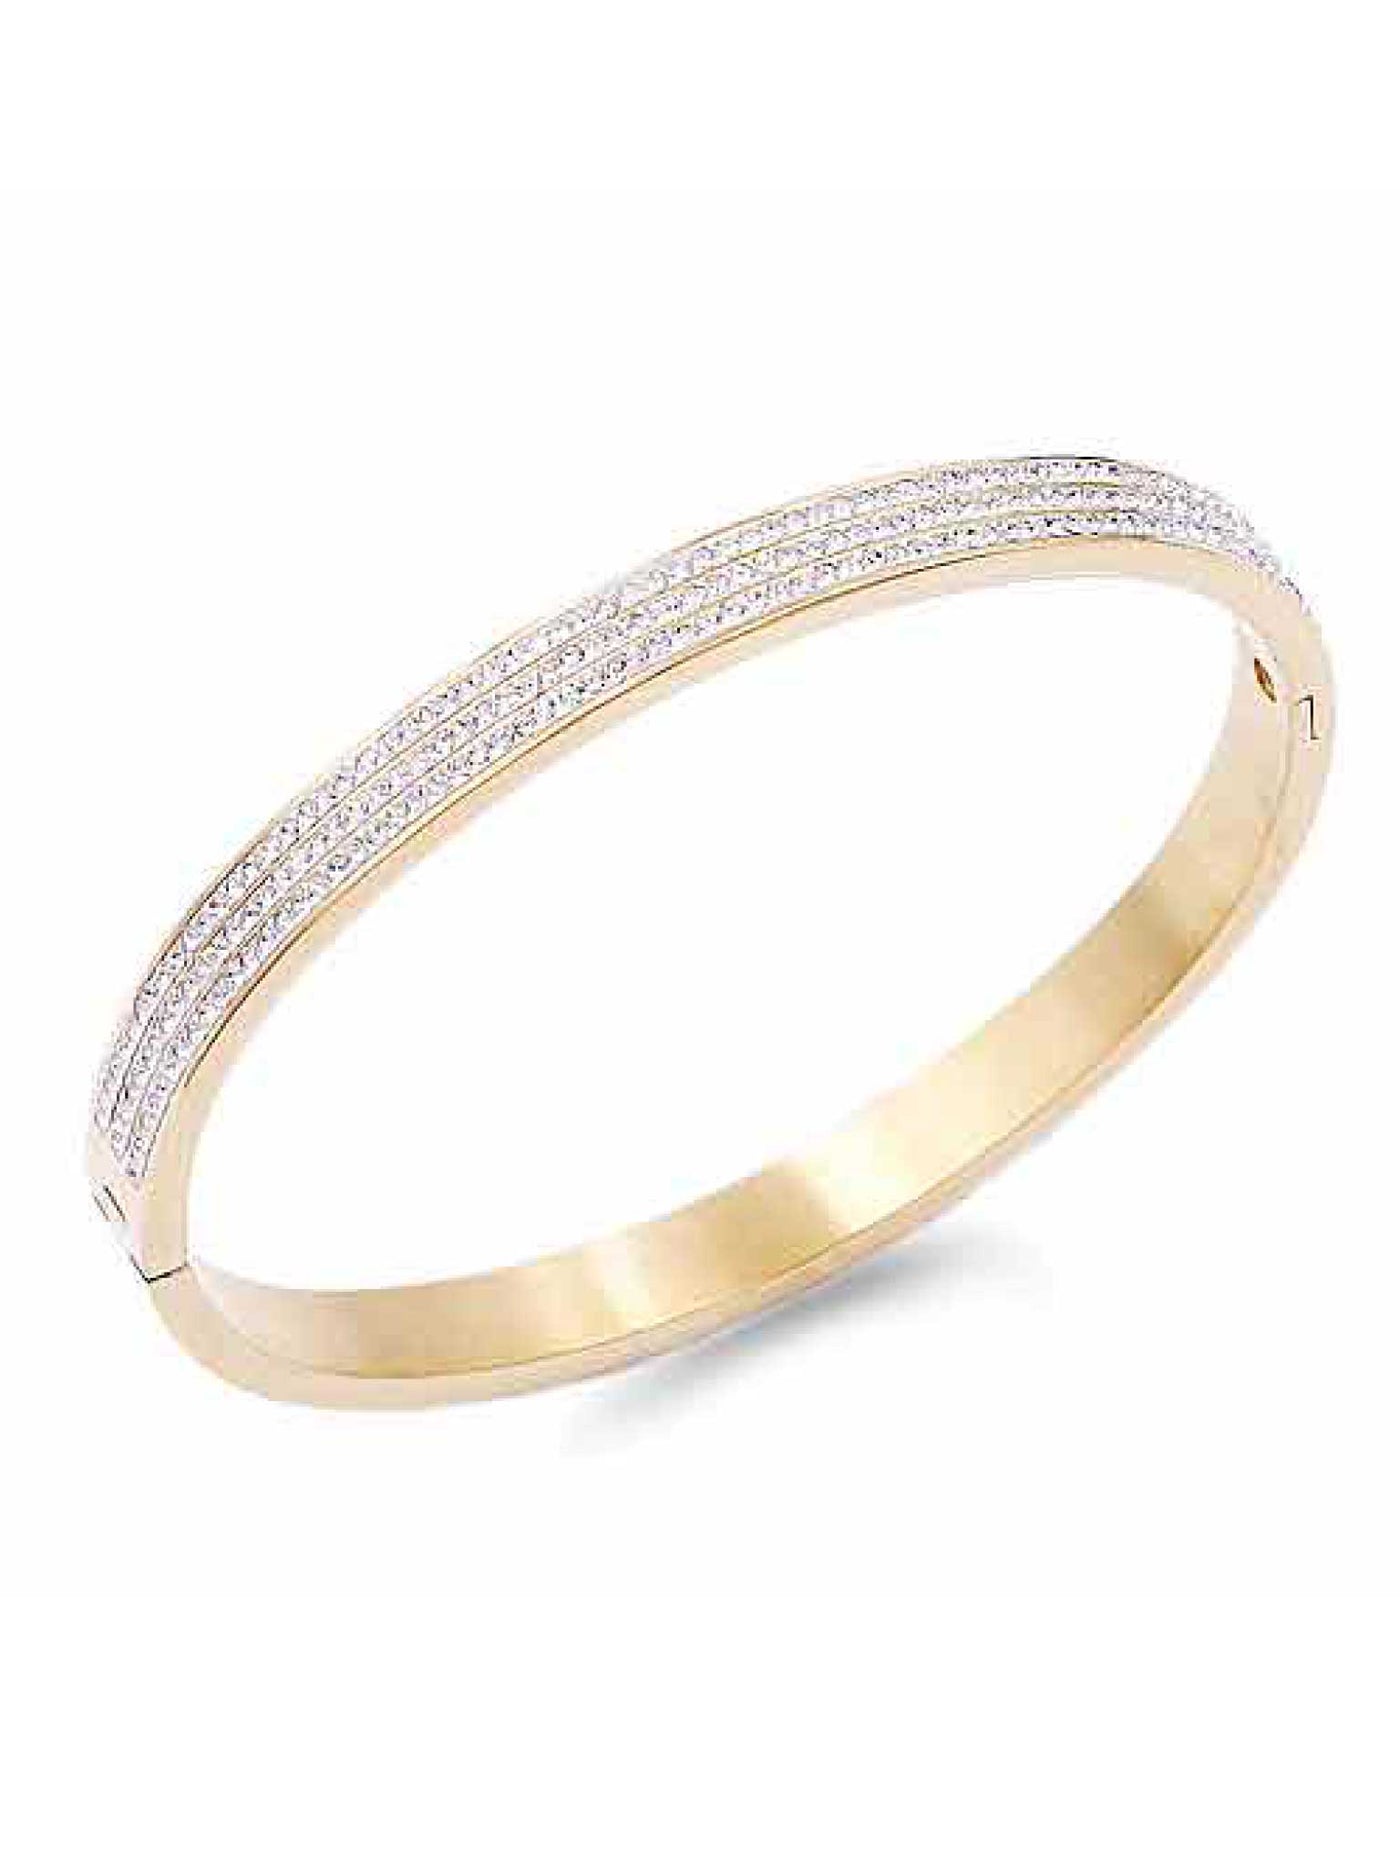 Gold Plated Stainless Steel Hinged Bangle